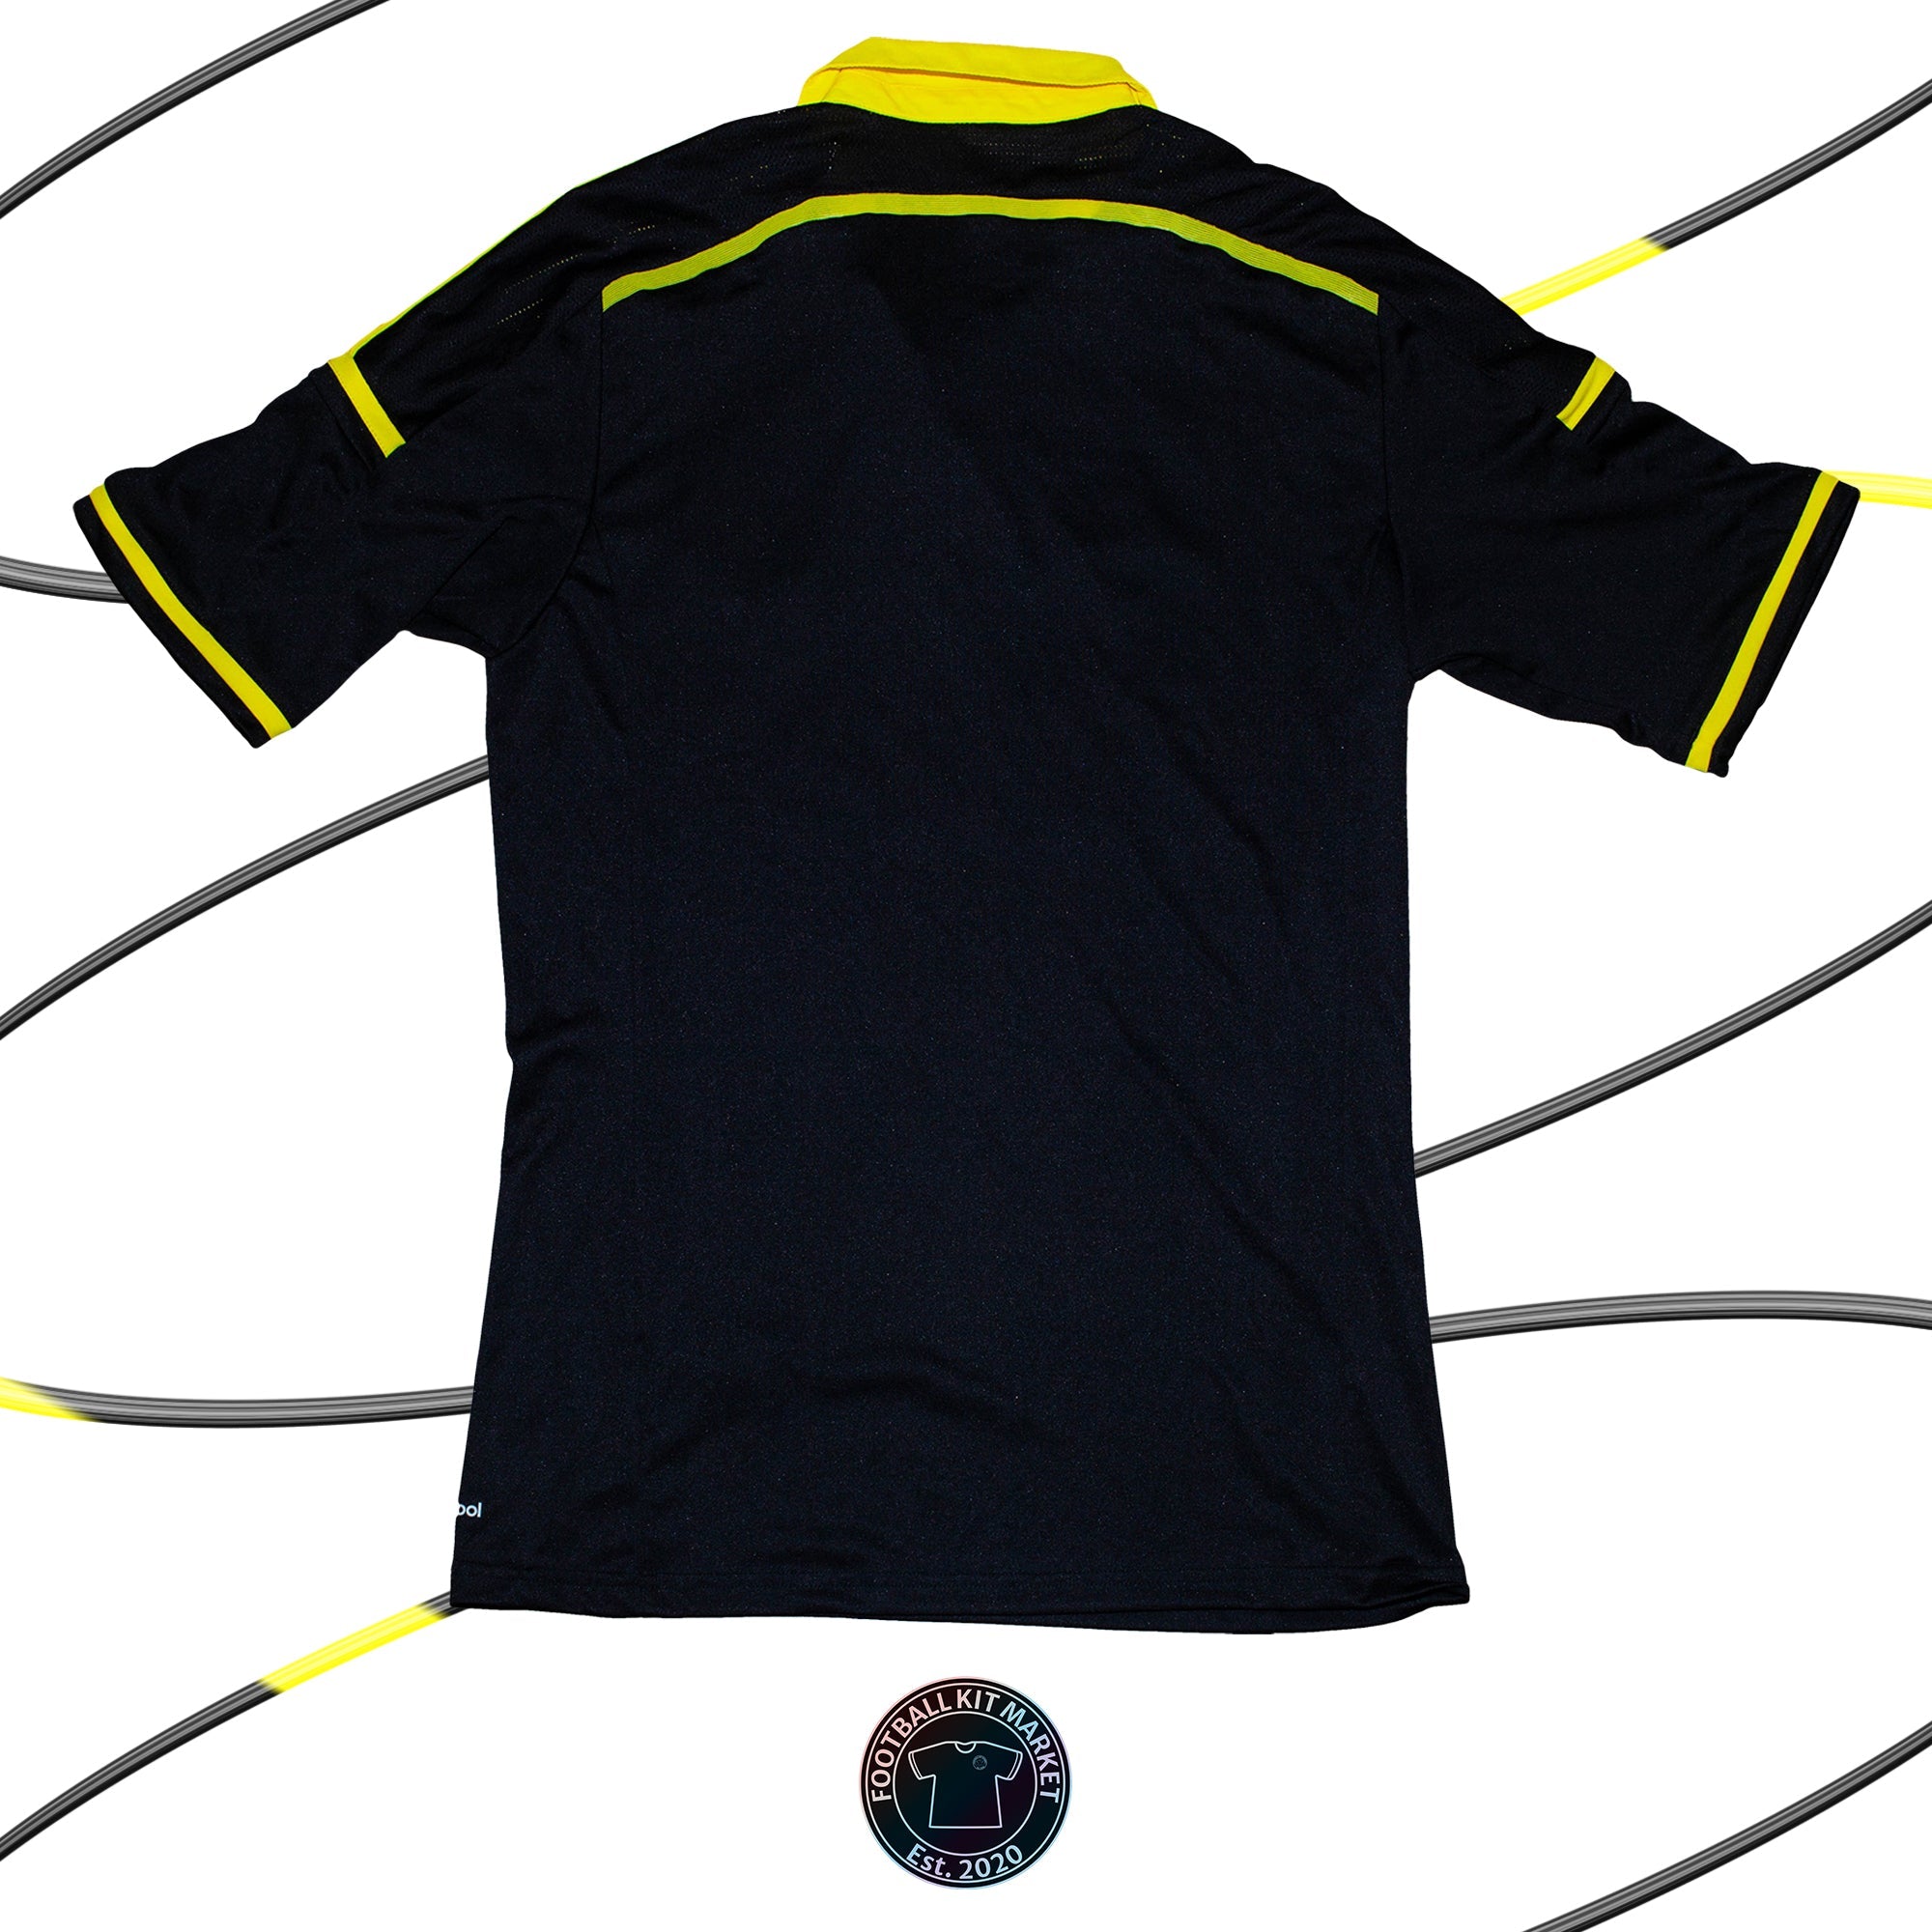 Genuine AIK STOCKHOLM Home Shirt (2014-2015) - ADIDAS (S) - Product Image from Football Kit Market